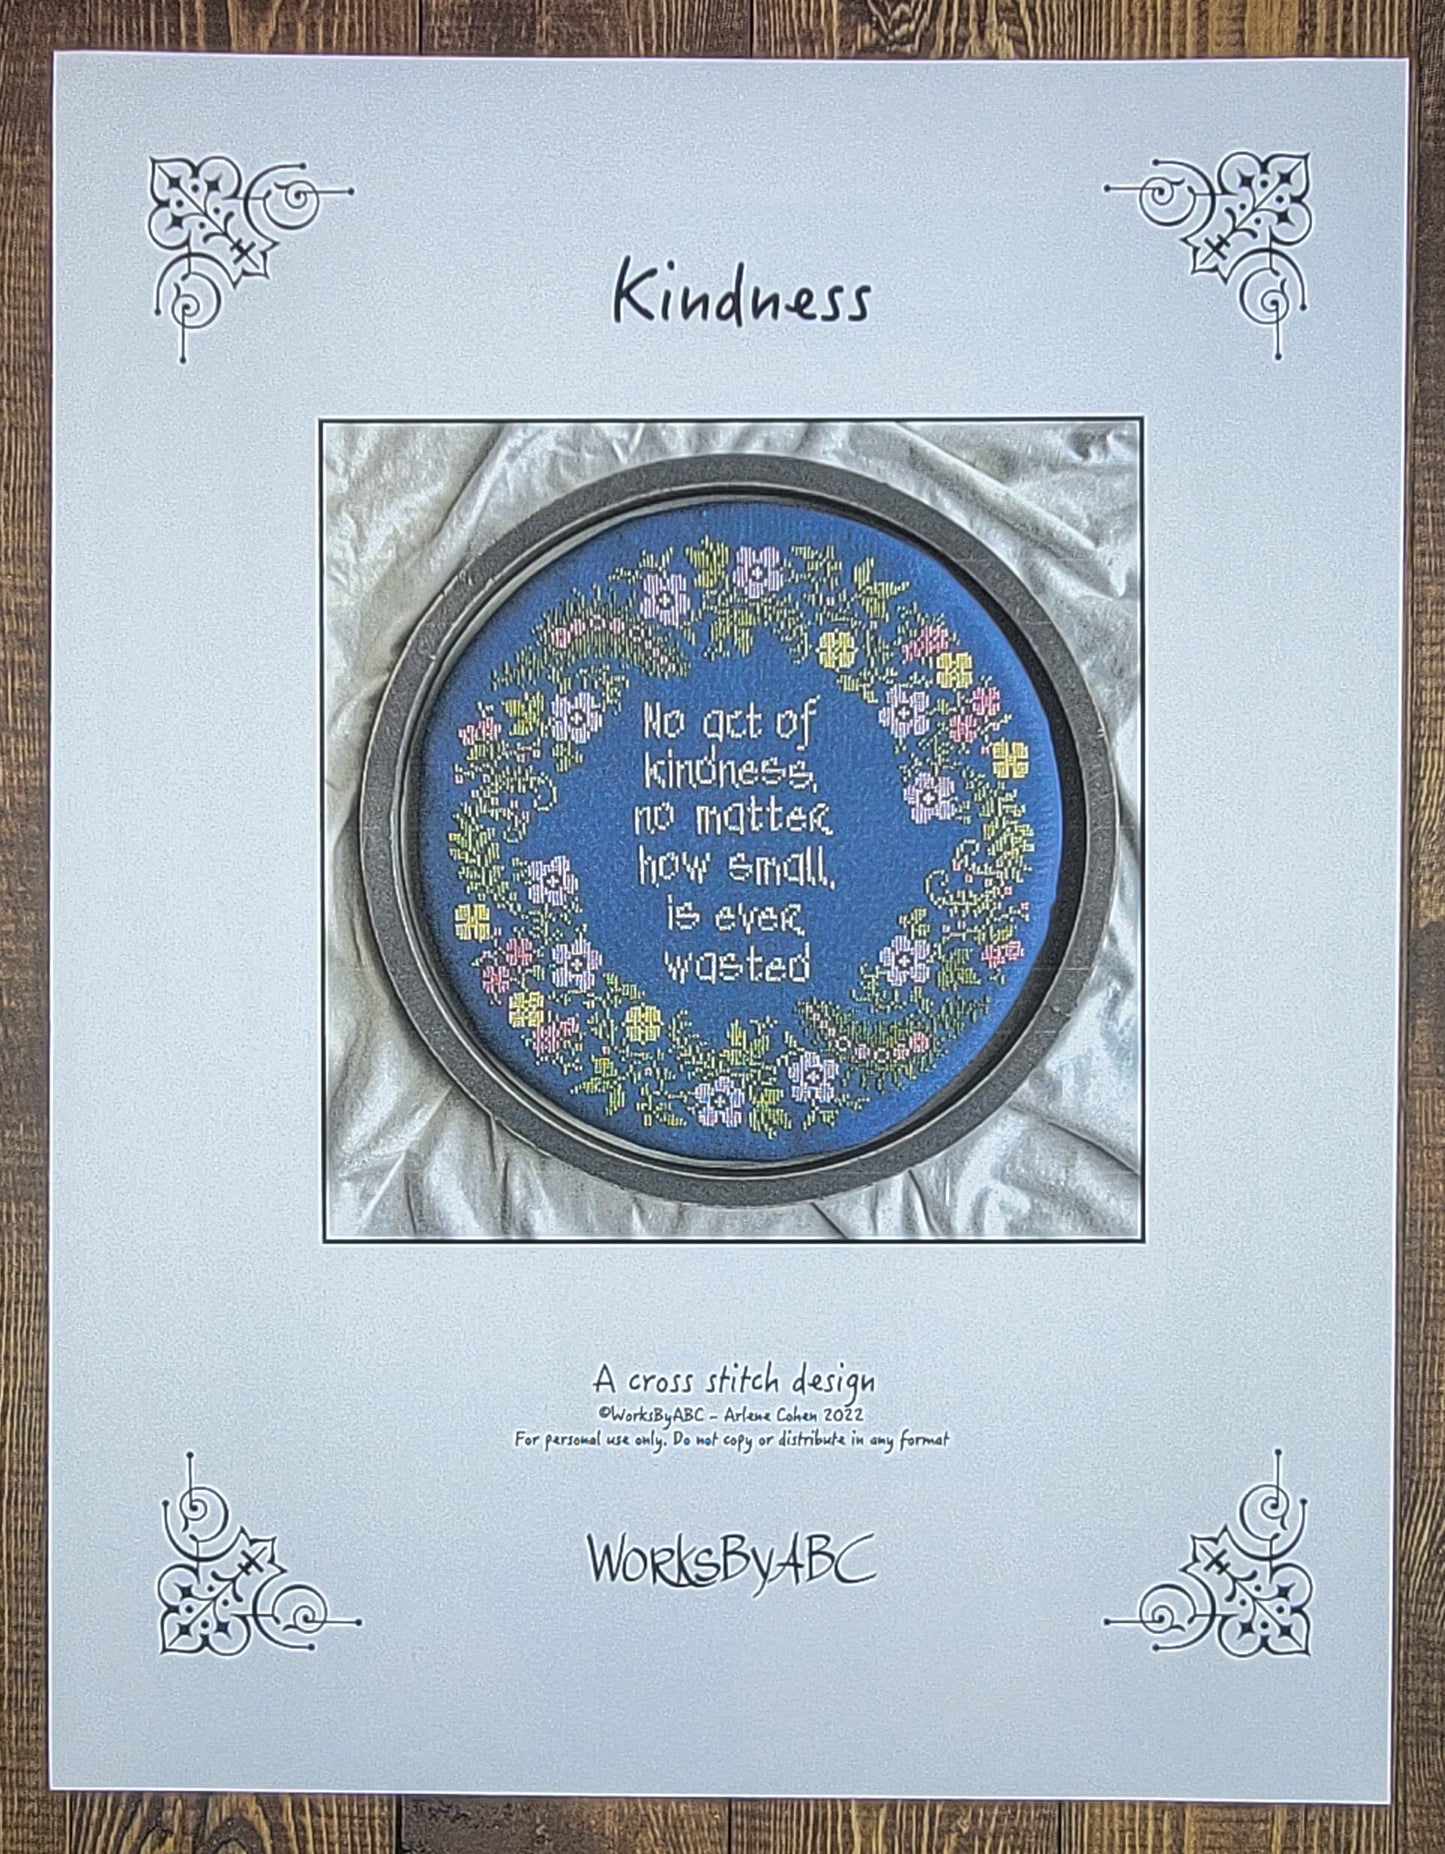 Kindness by Works by ABC